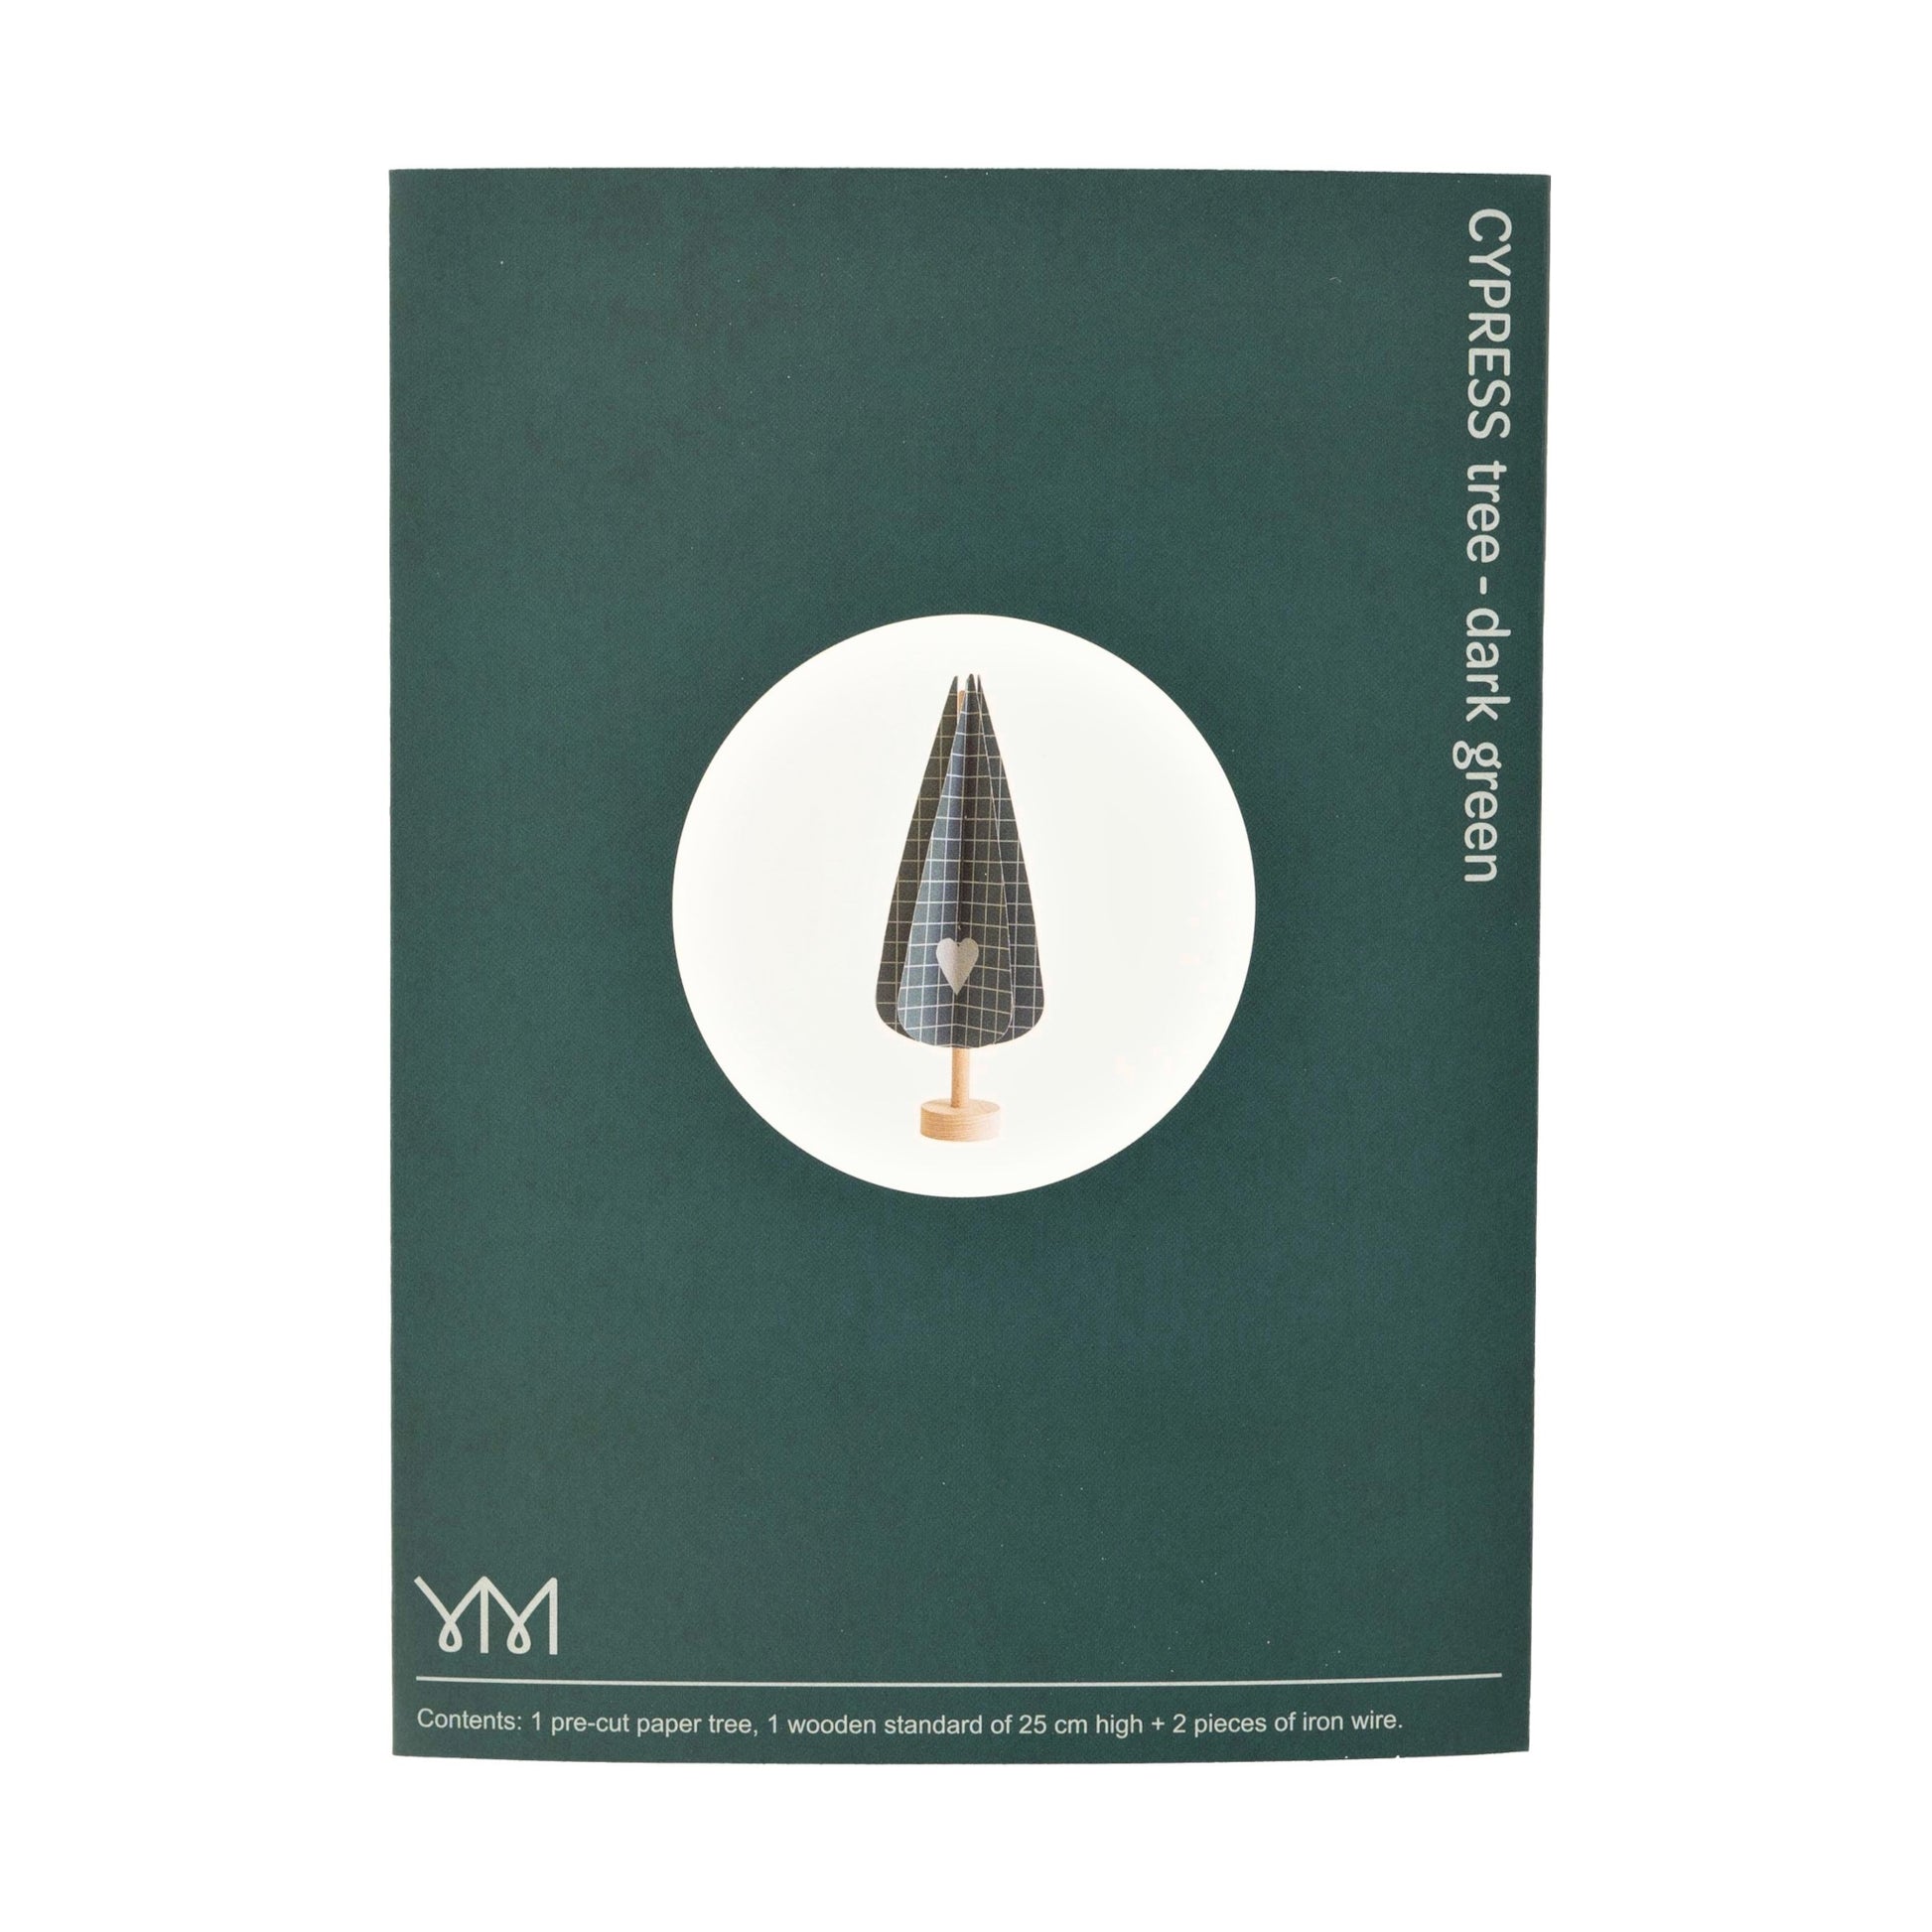 paper craft kit of a dark green cypress tree by Jurianne Matter, product packaging pictured